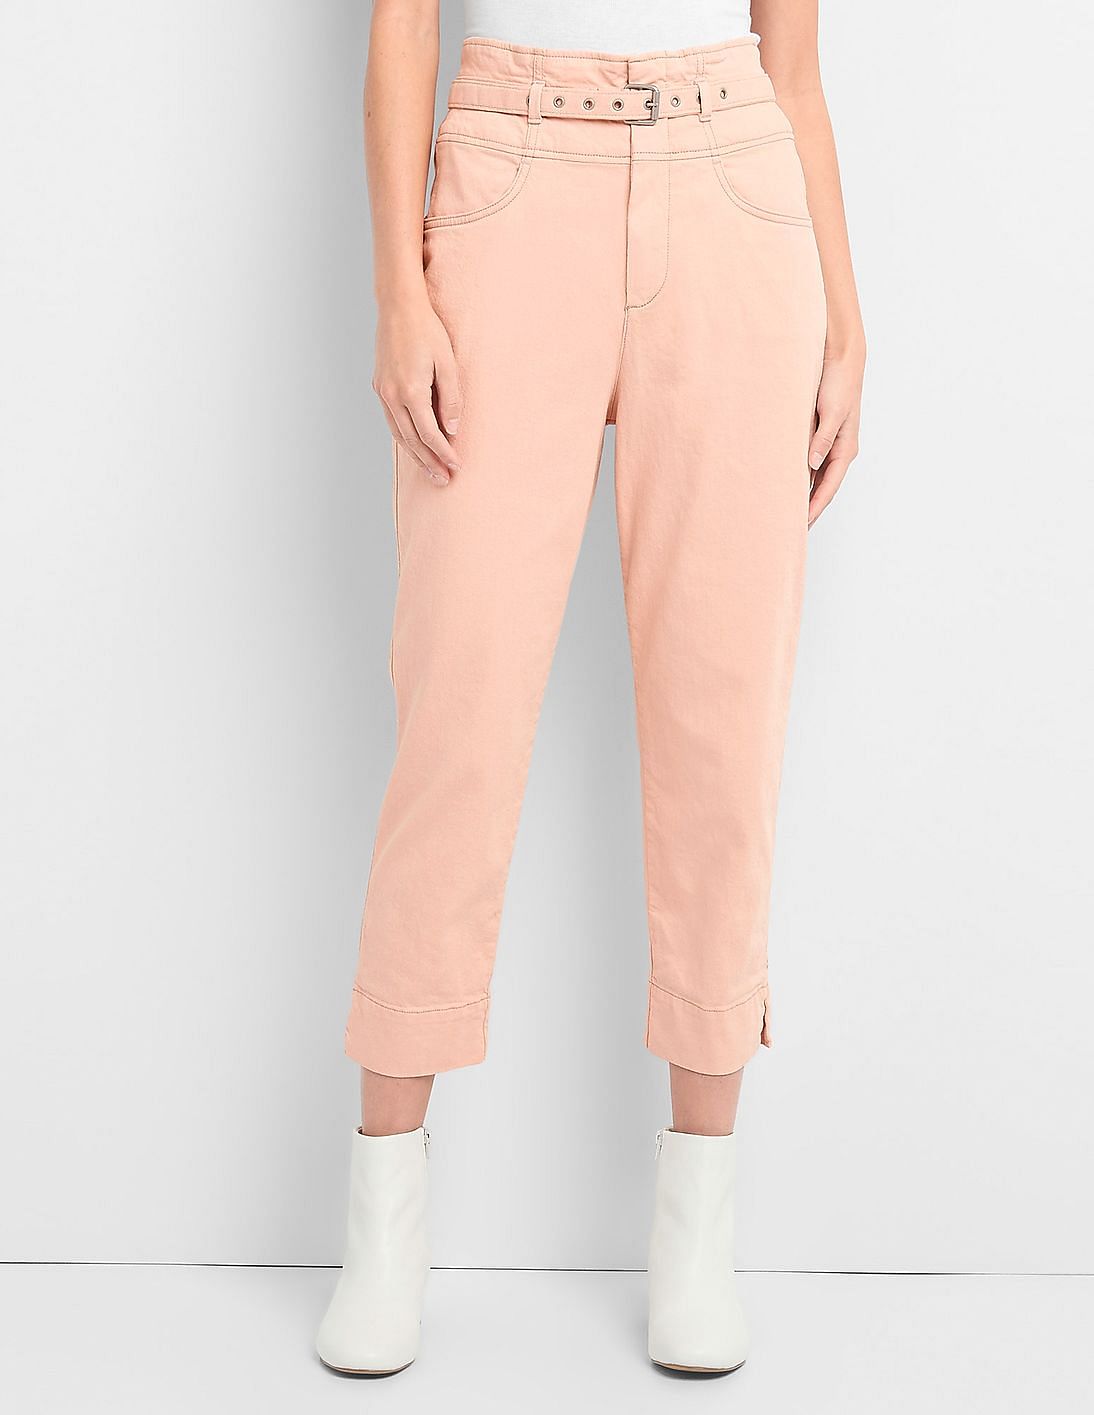 Buy GAP Women Pink High Rise Belted Chinos - NNNOW.com